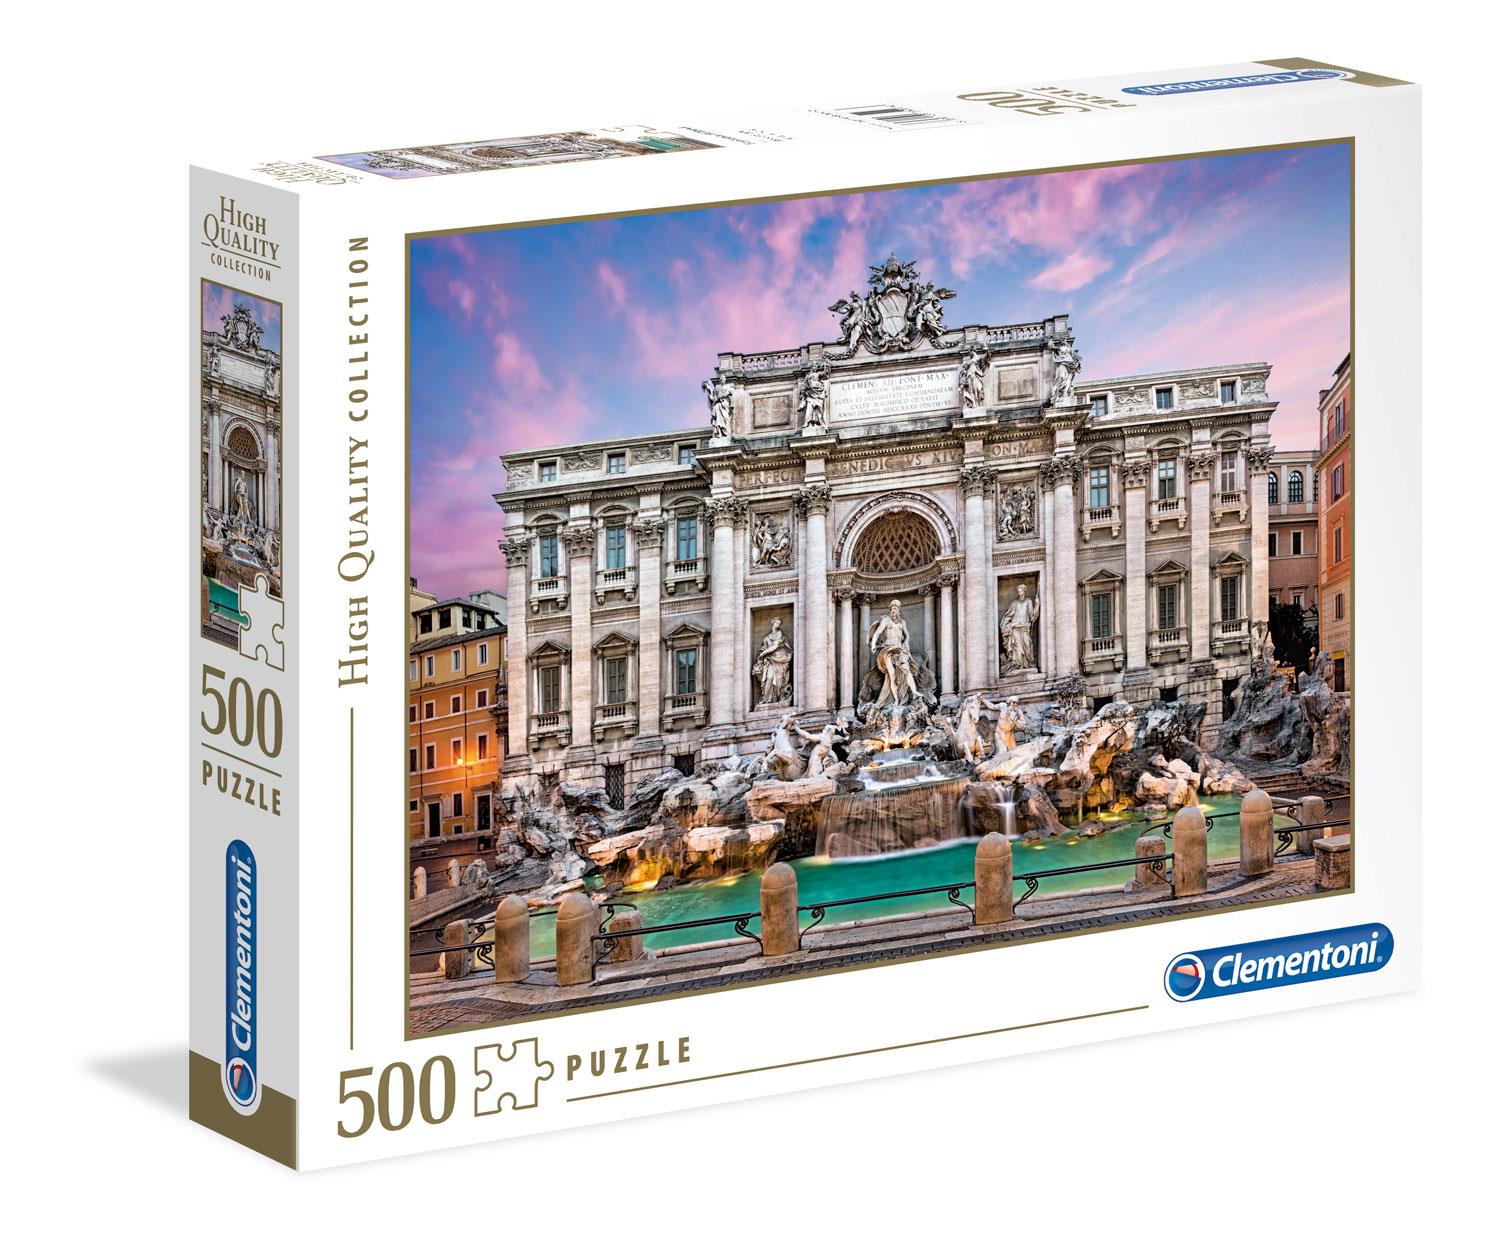 Clementoni Trevi Fountain High Quality Jigsaw Puzzle (500 Pieces)